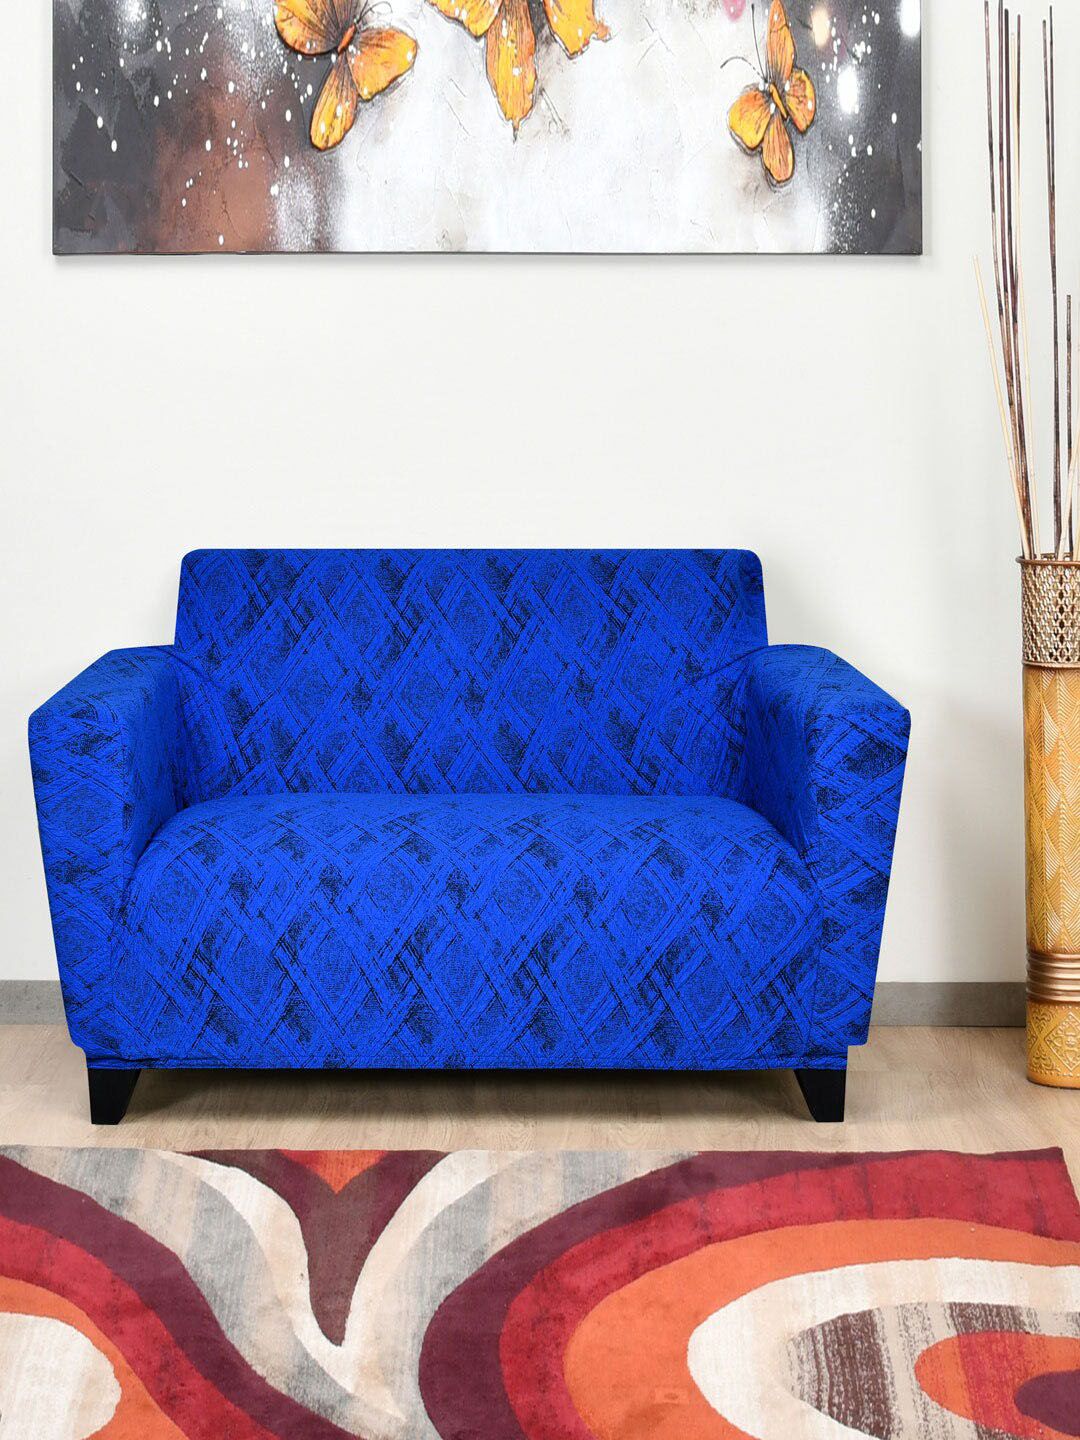 Athome by Nilkamal Blue Printed Sofa 3-Seater Sofa Covers Price in India